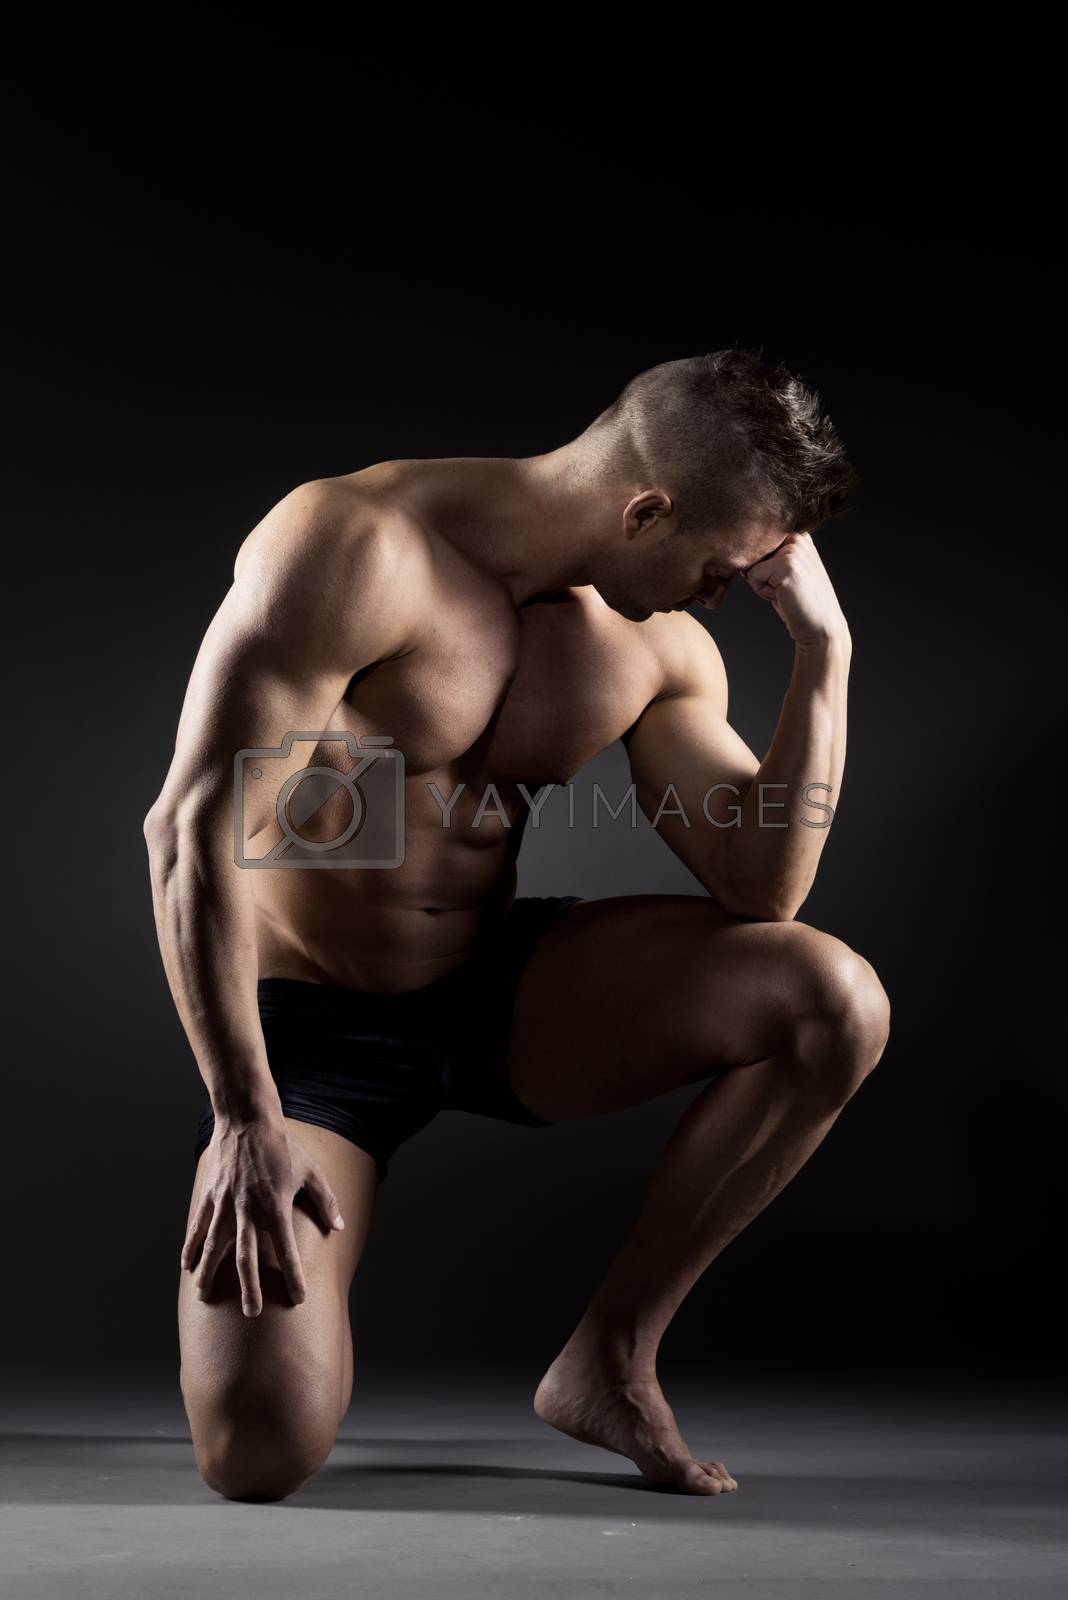 Royalty free image of Body builder posing by stokkete